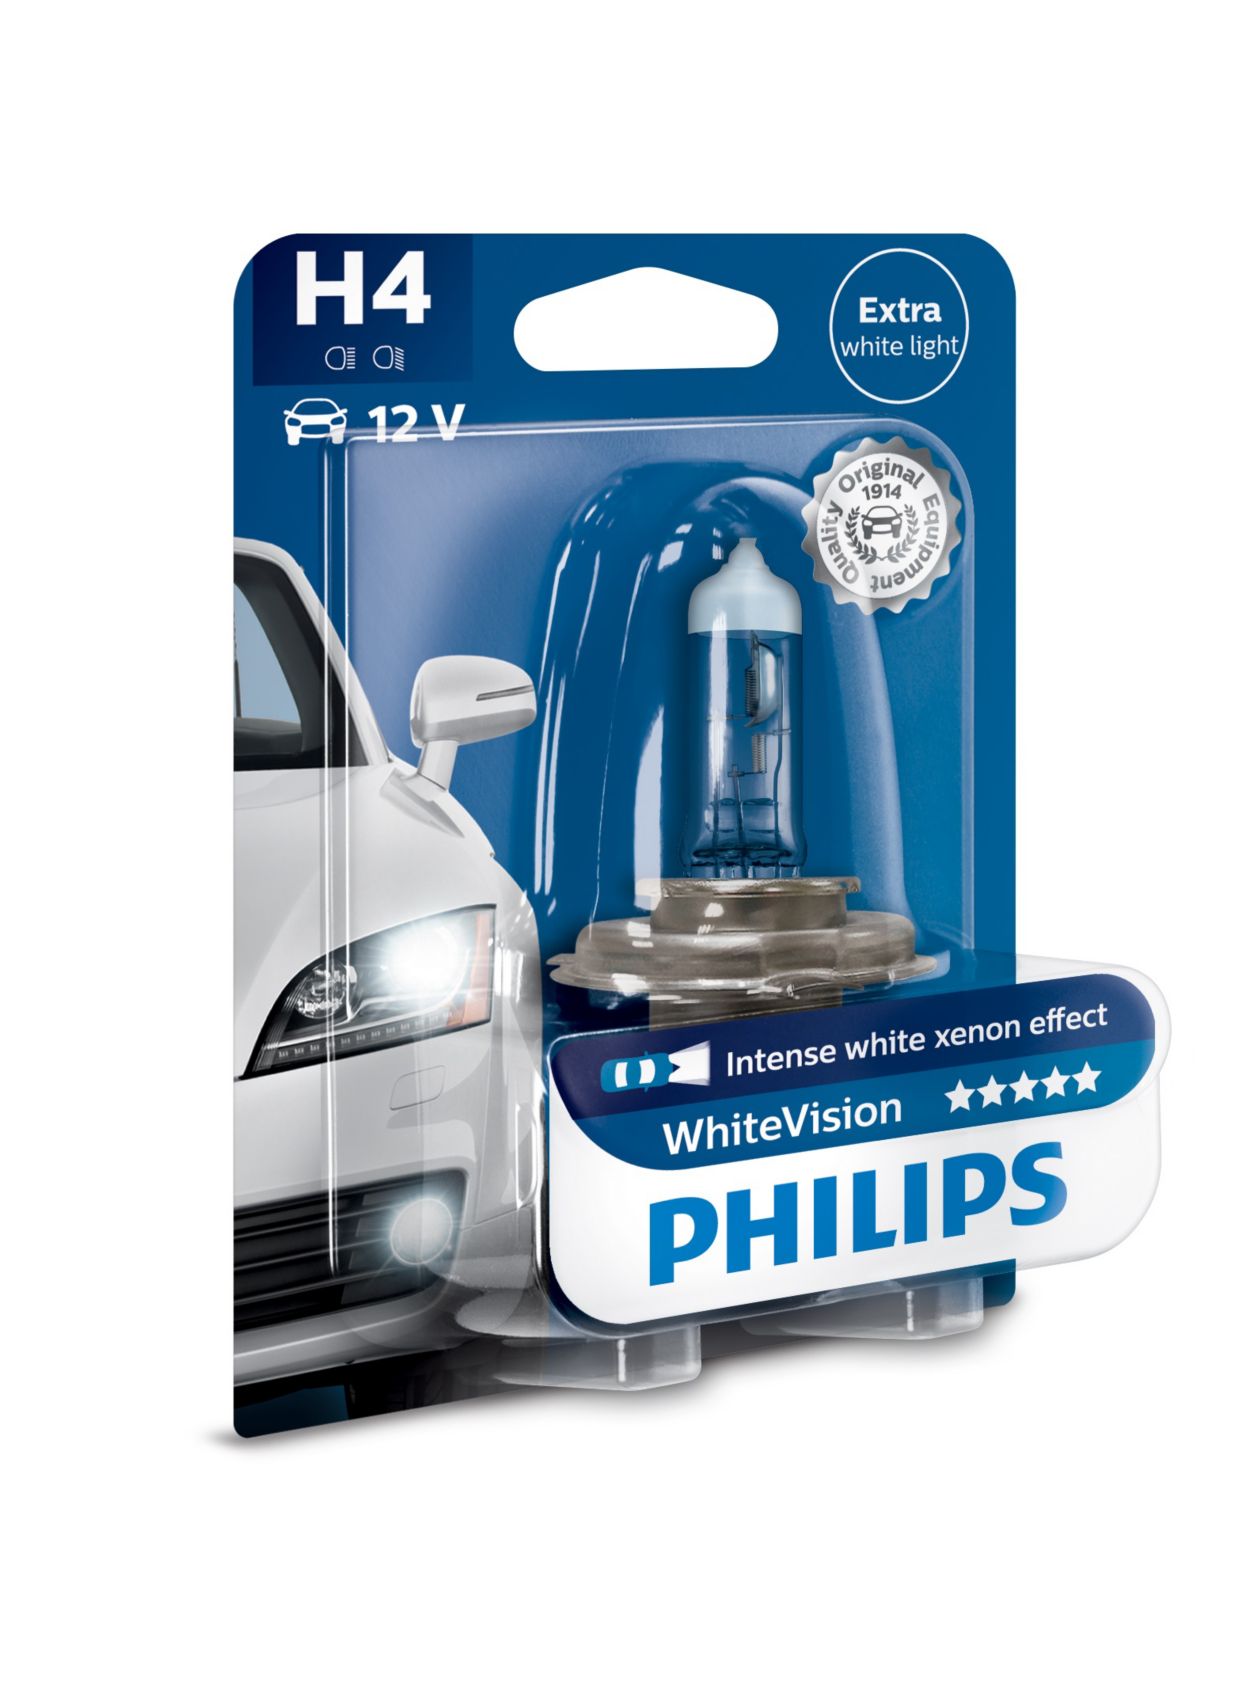 H4 WHITEVISION PHILIPS